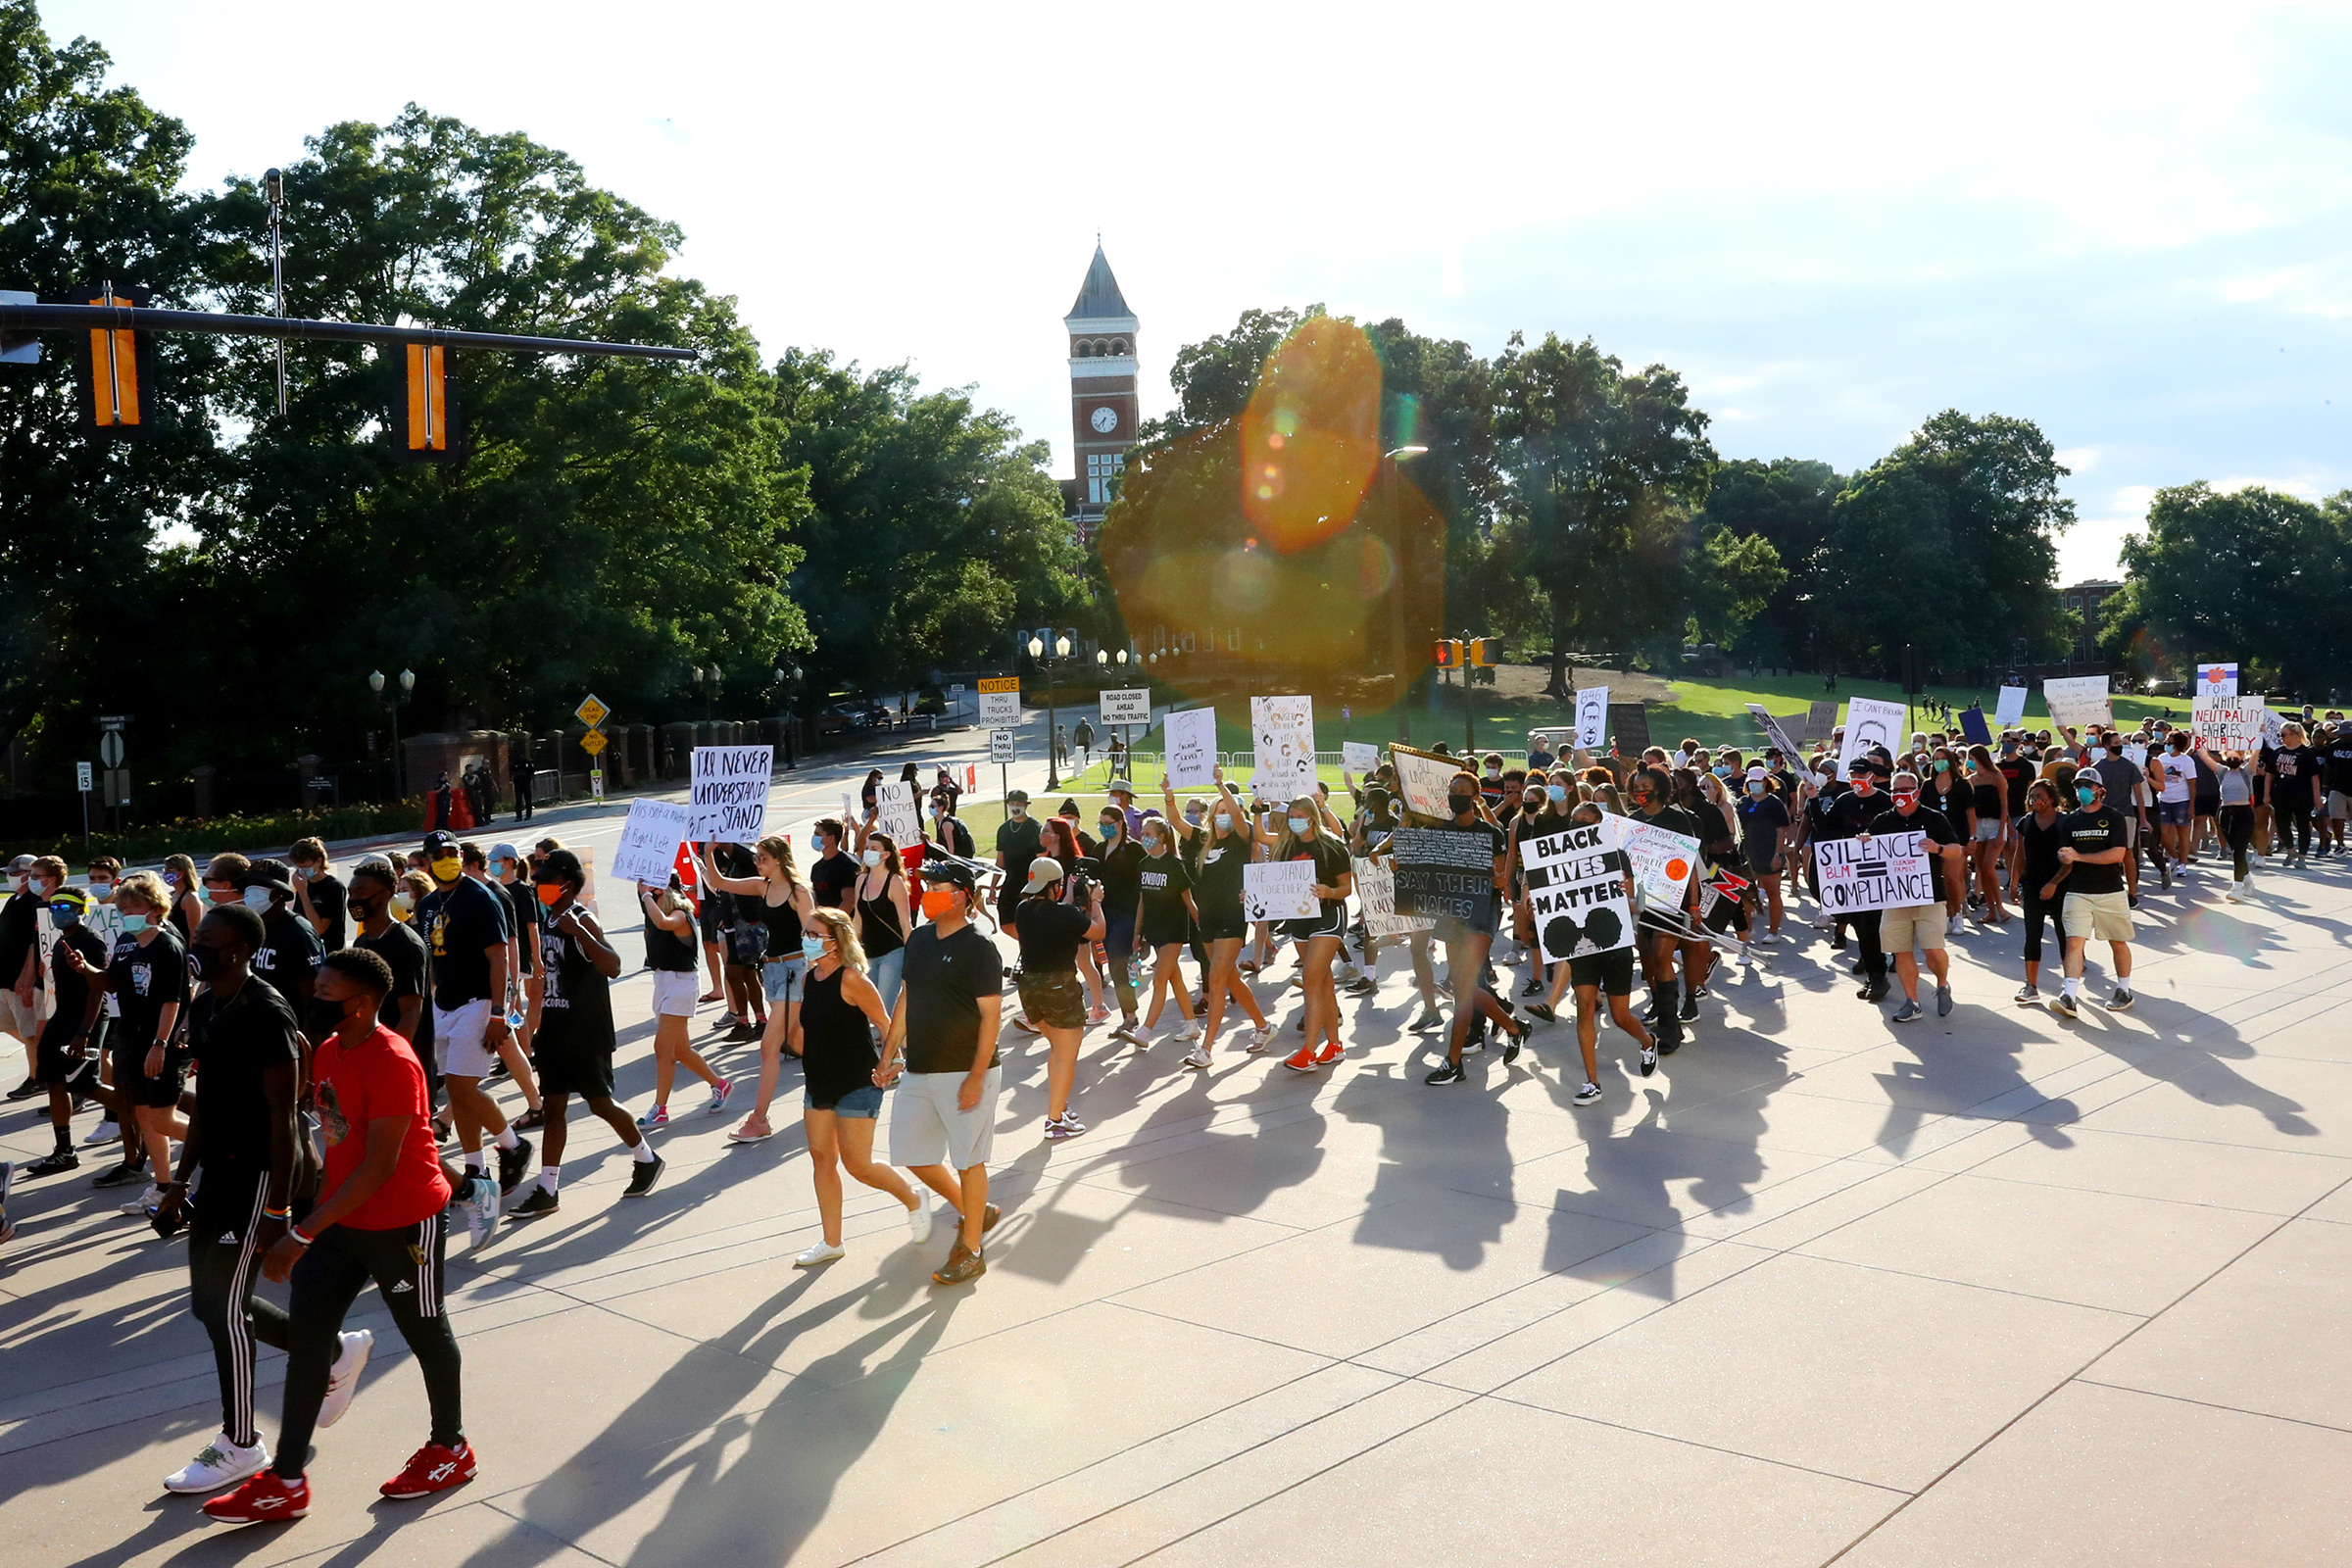 Clemson University football players lead a "March for Change" protest past Tillman Hall on June 13 in Clemson, South Carolina. The Clemson University Board of Trustees voted to strip "Calhoun" from their Honors College name and rename Tillman Hall. (Maddie Meyer—Getty Images)